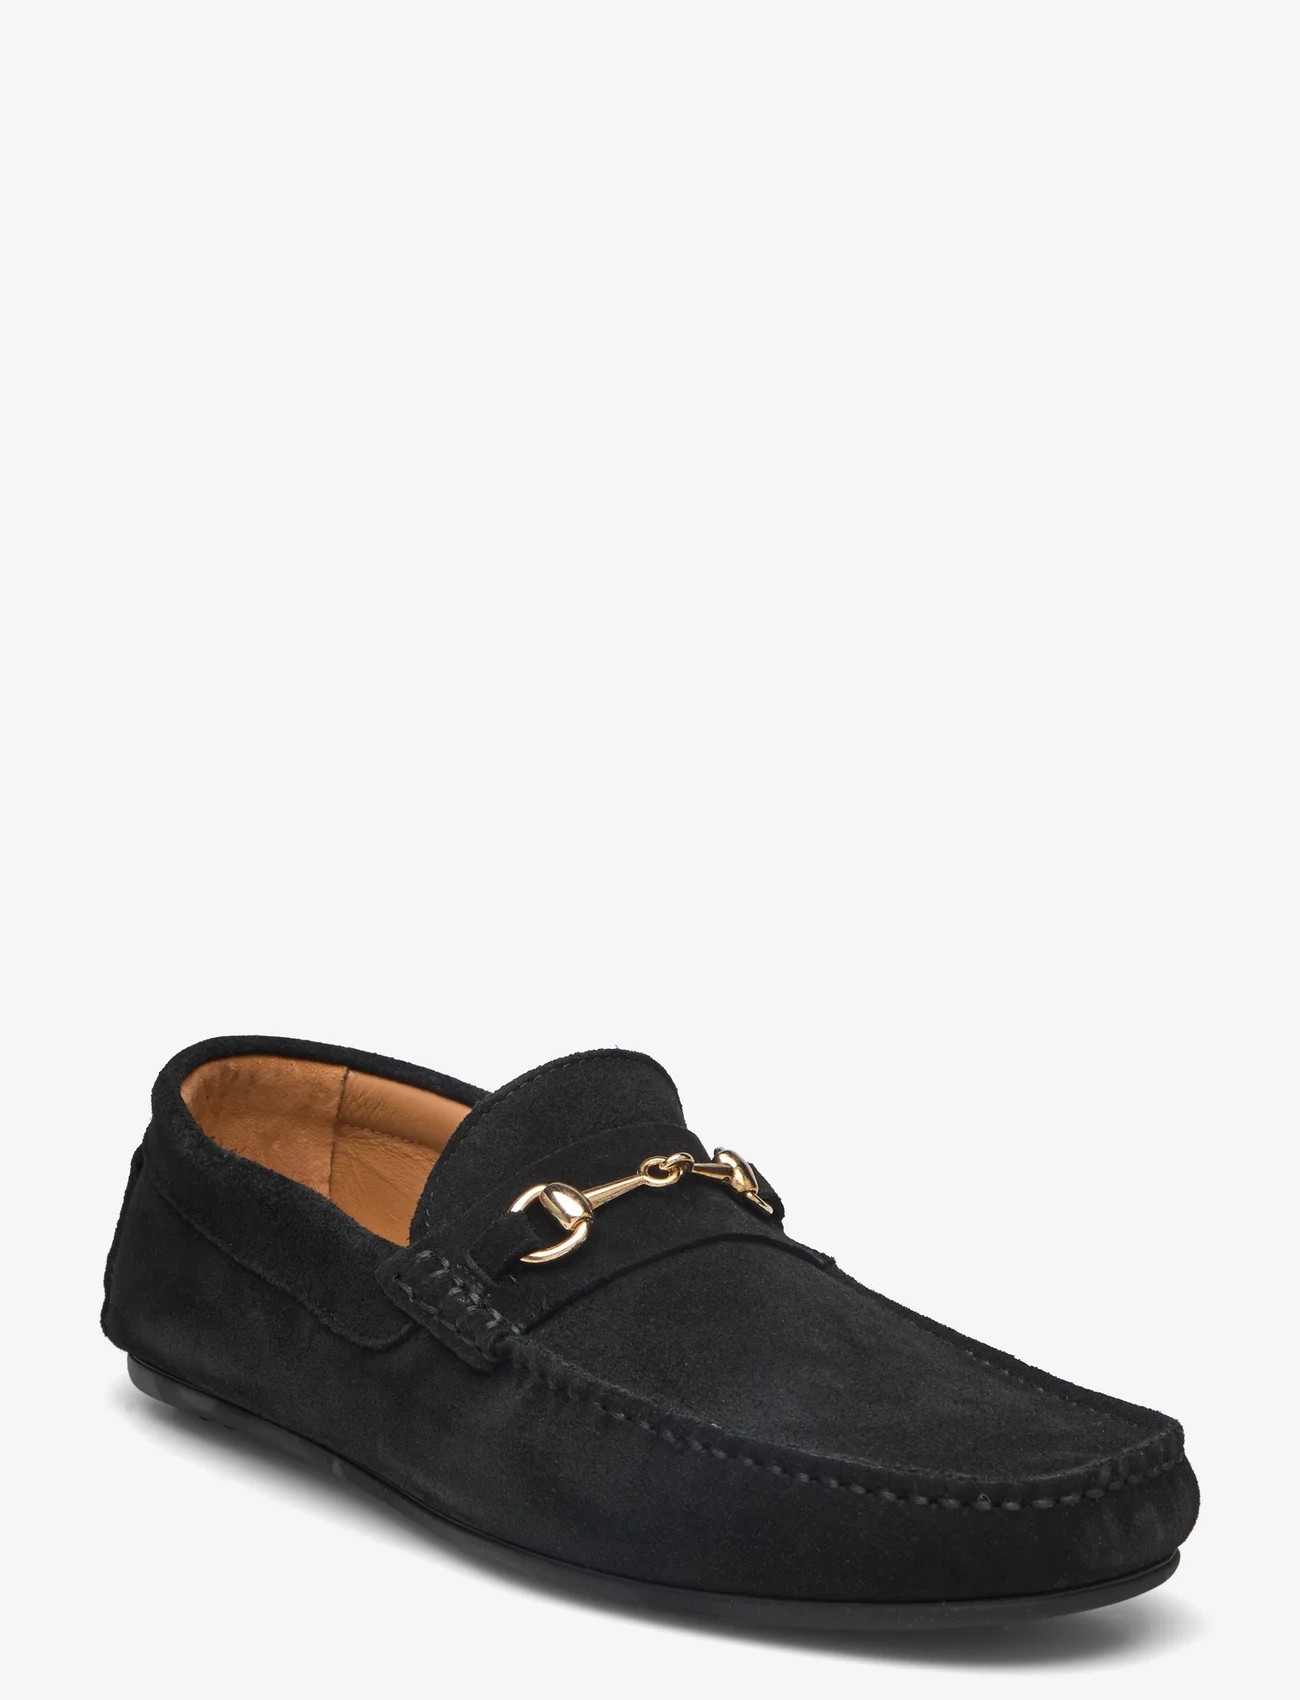 Selected Homme - SLHSERGIO SUEDE HORSEBIT DRIVING SHOE - loafers - black - 0